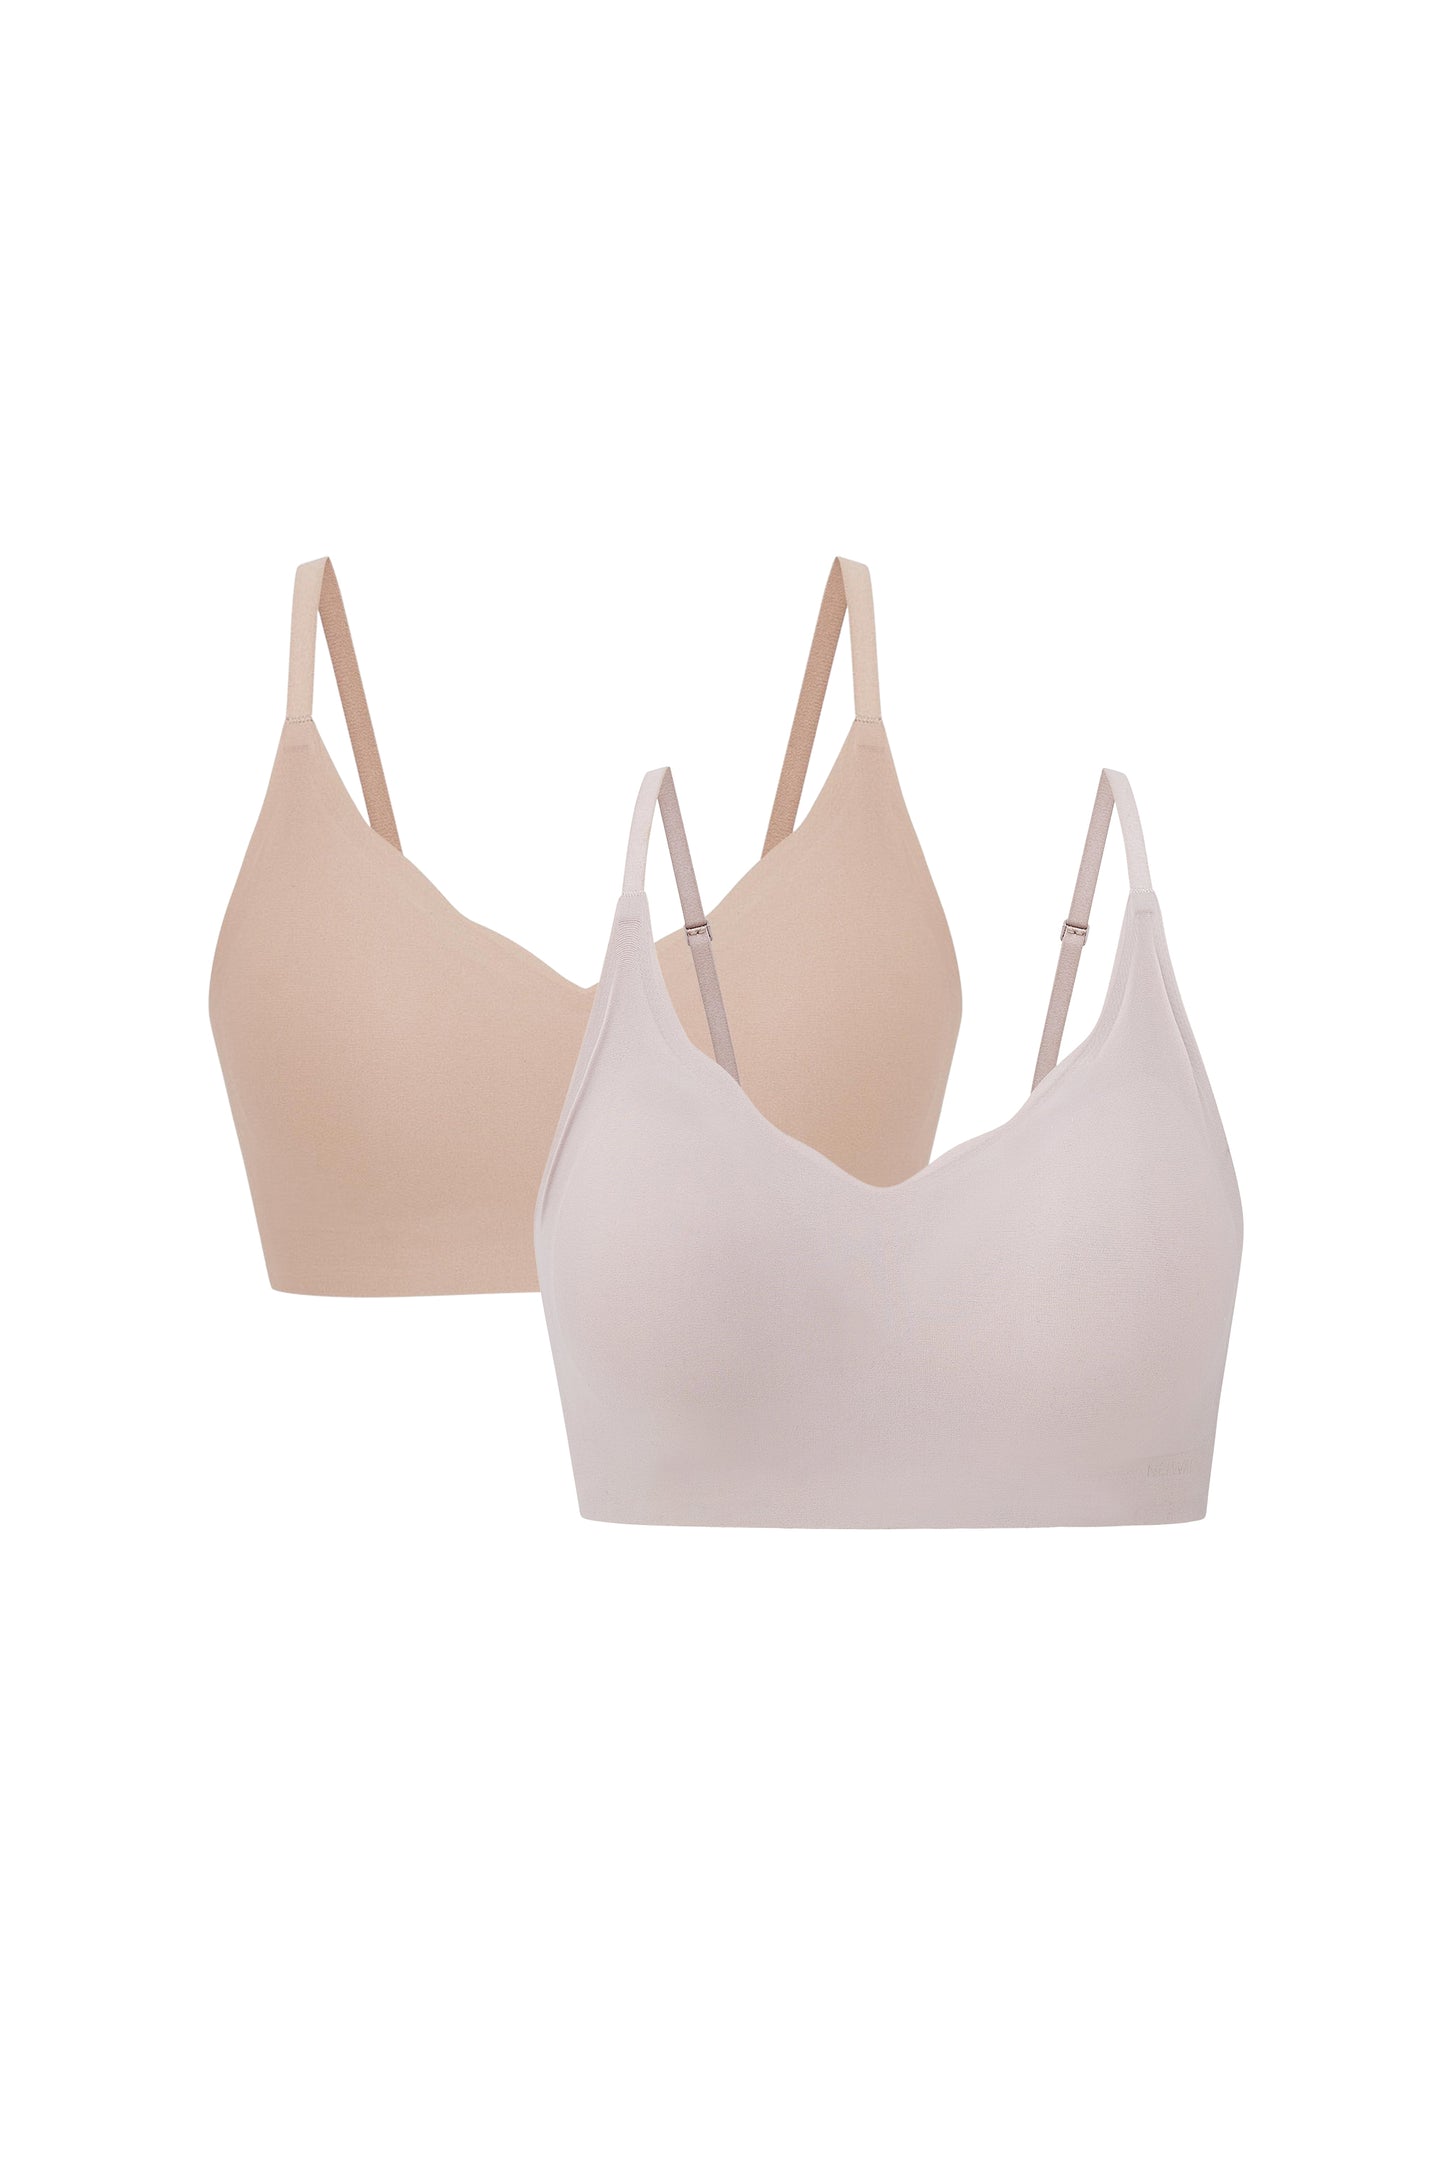 Flat lay image of two bras